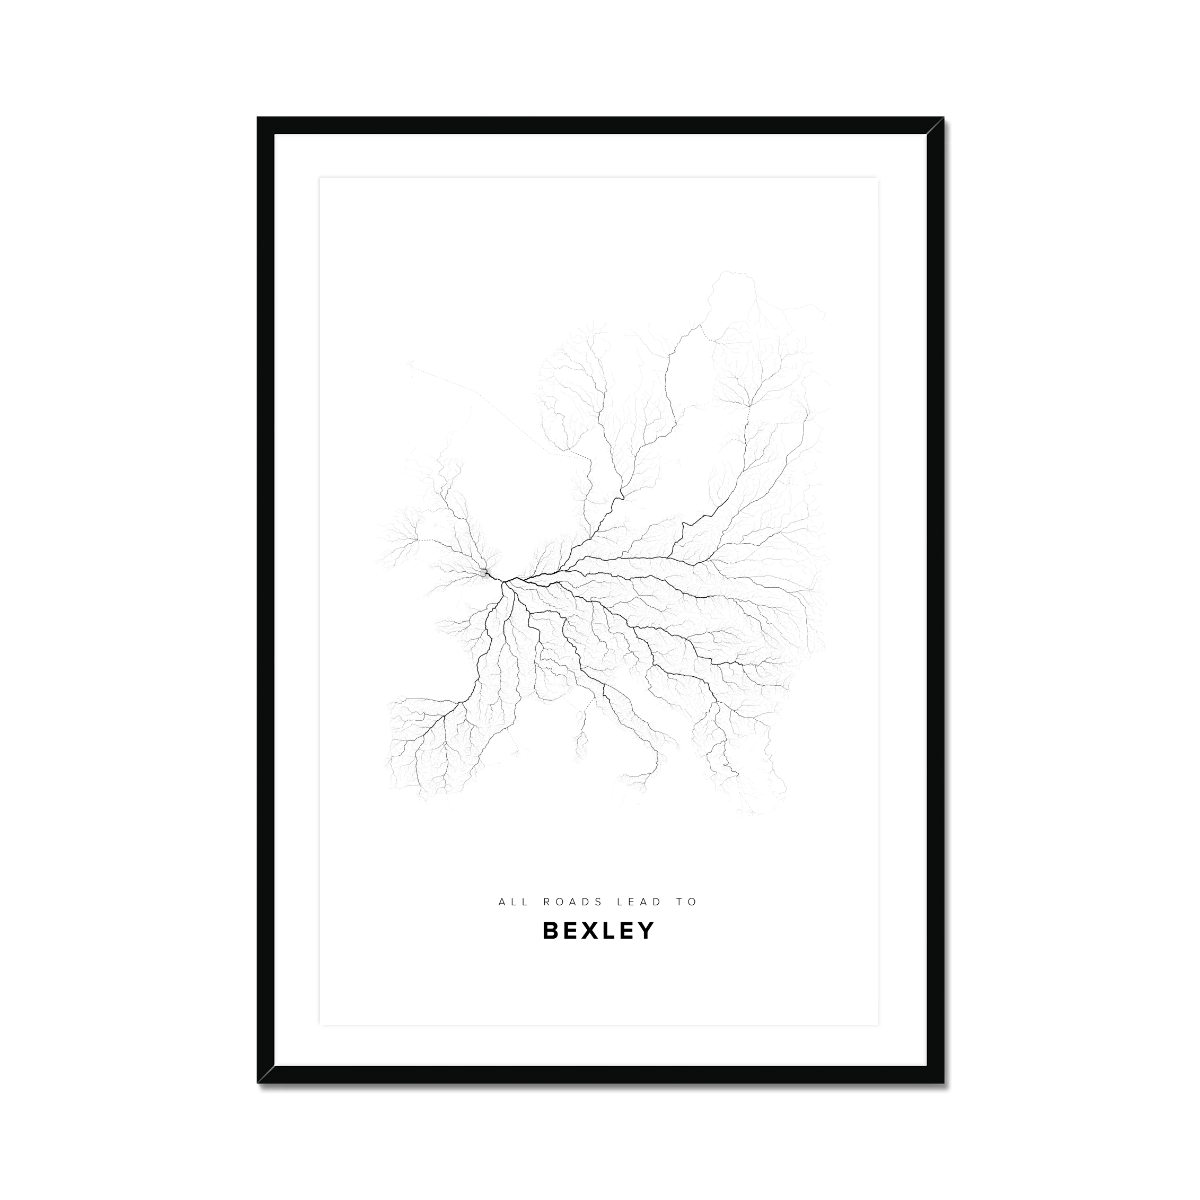 All roads lead to Bexley (United Kingdom of Great Britain and Northern Ireland) Fine Art Map Print